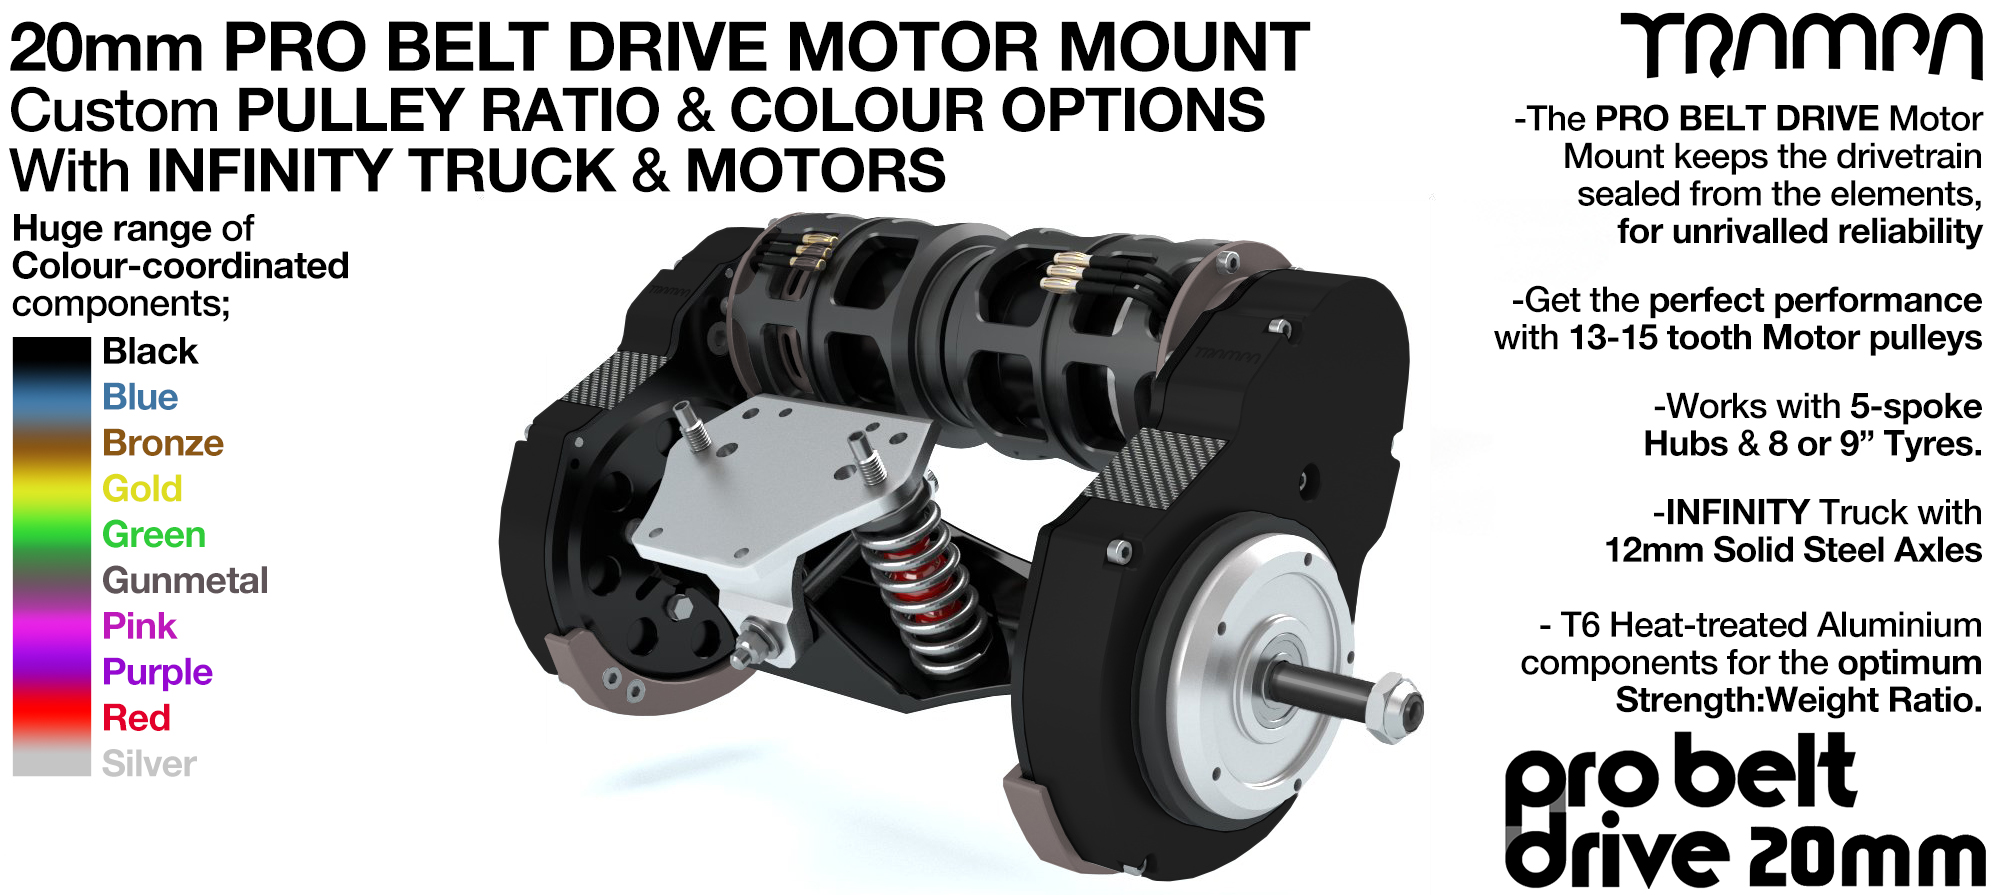 20mm PRO BELT DRIVE Motor Mounts MOTORS, PULLEYS & Motor PROTECTION FILTERS mounted on a CNC TRUCK 